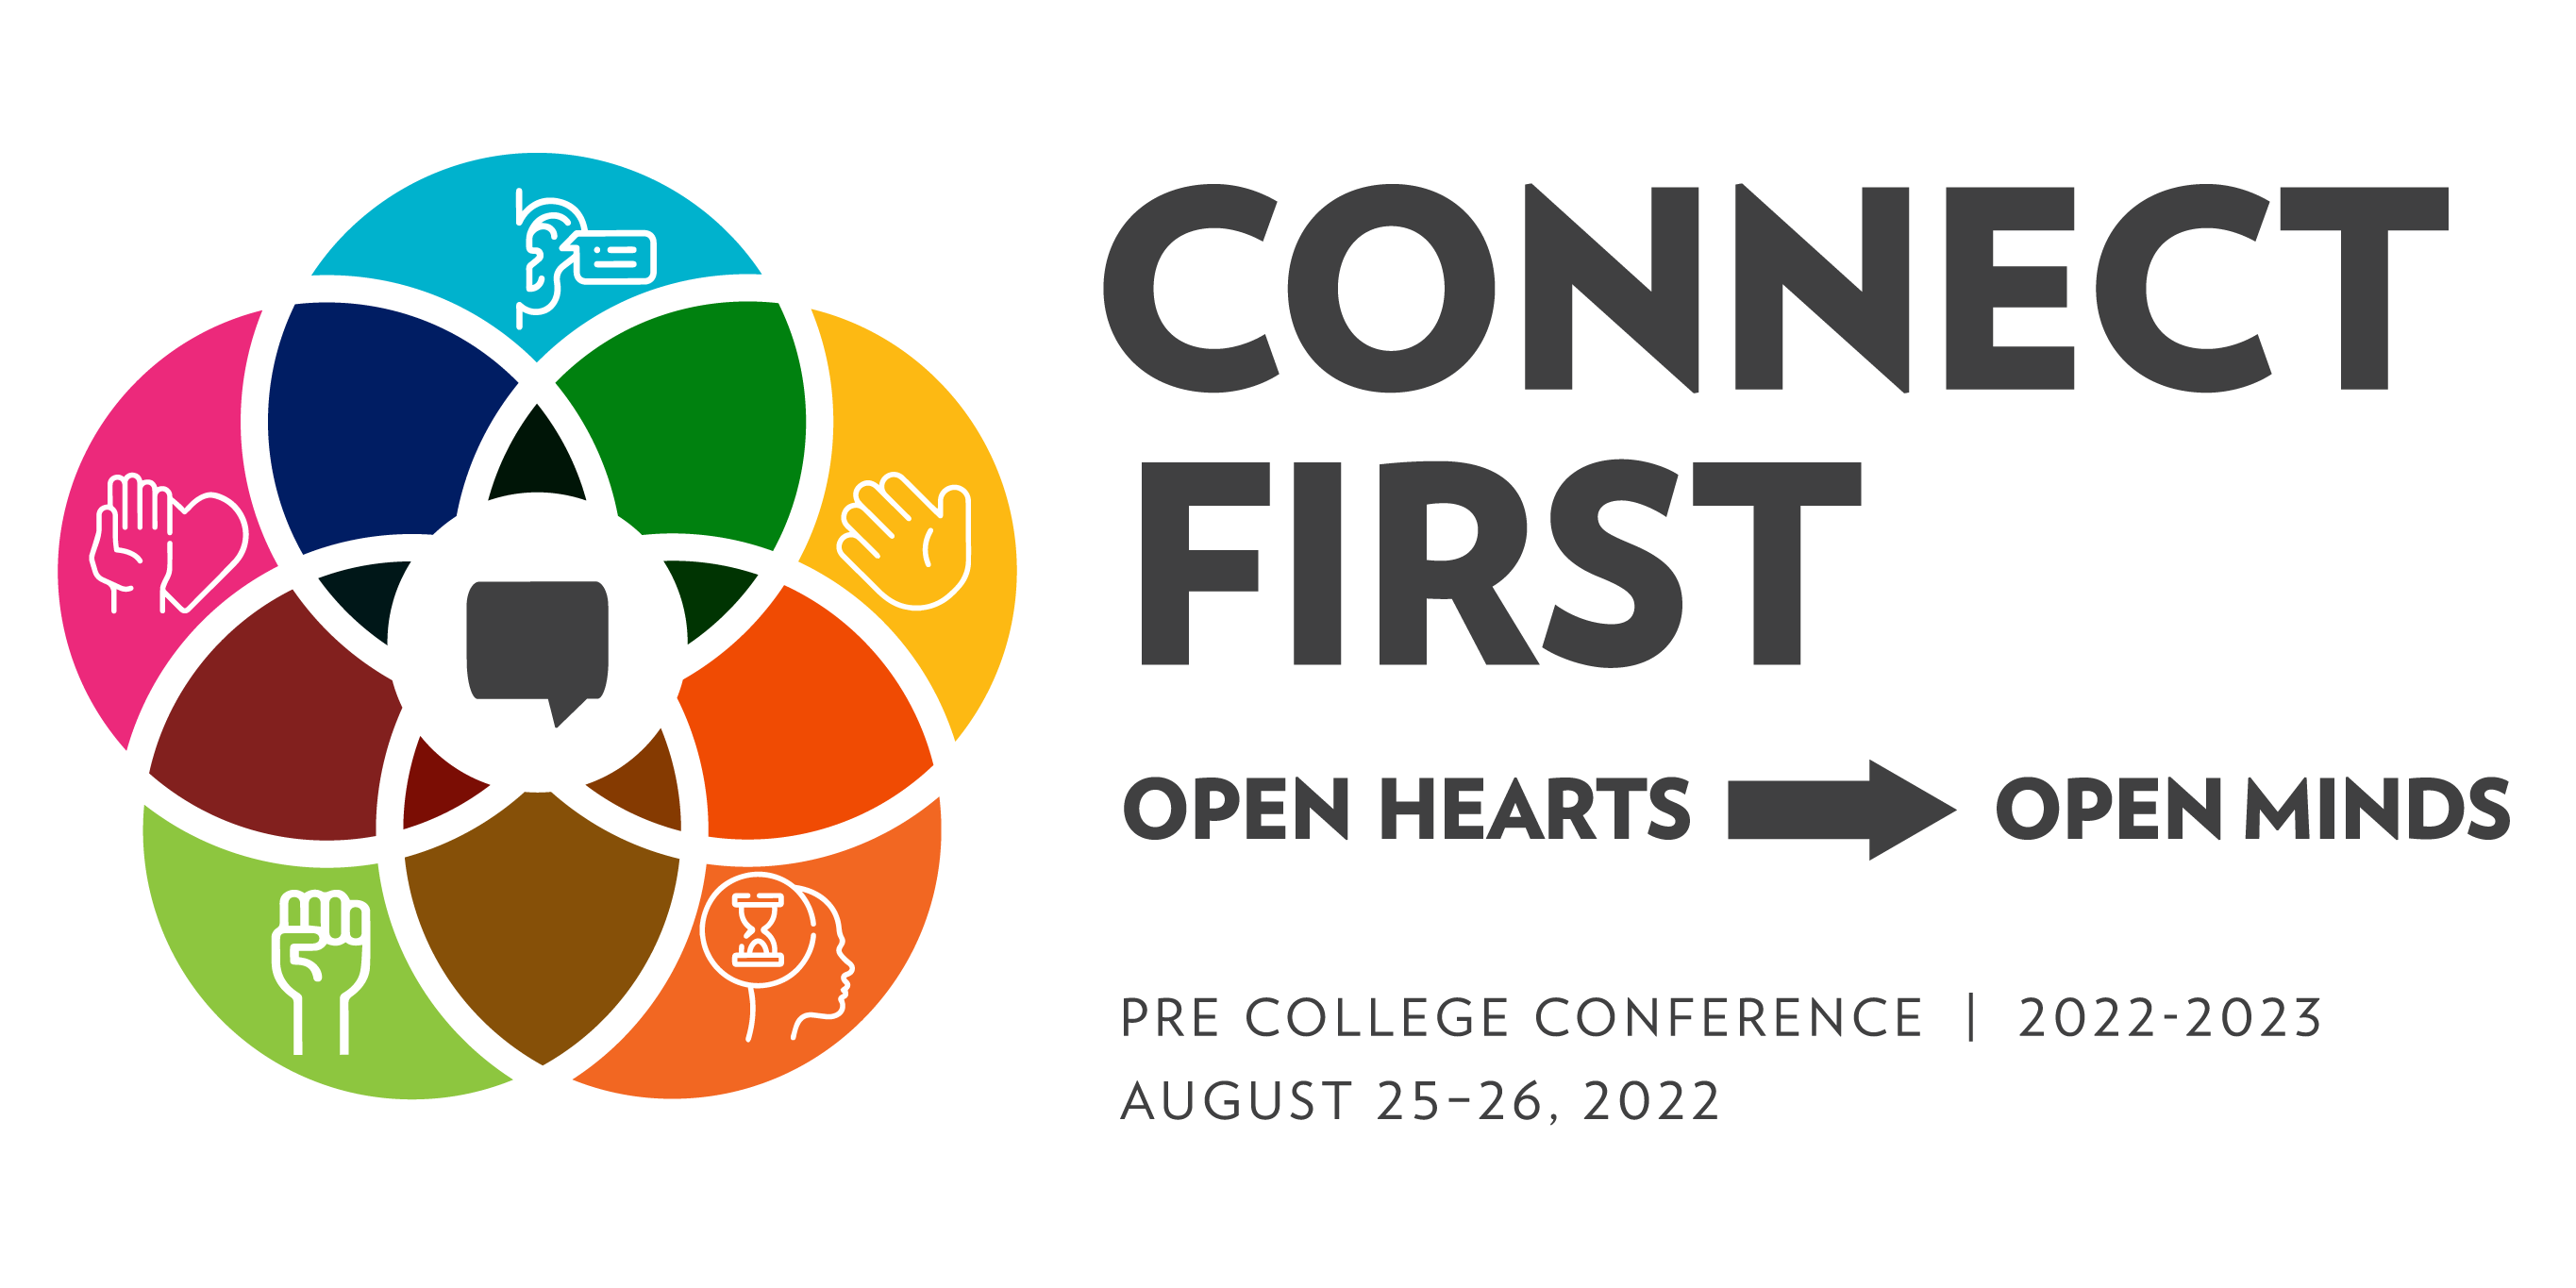 Connect First: Open Hearts ➞ Open Minds 8/25-8/26